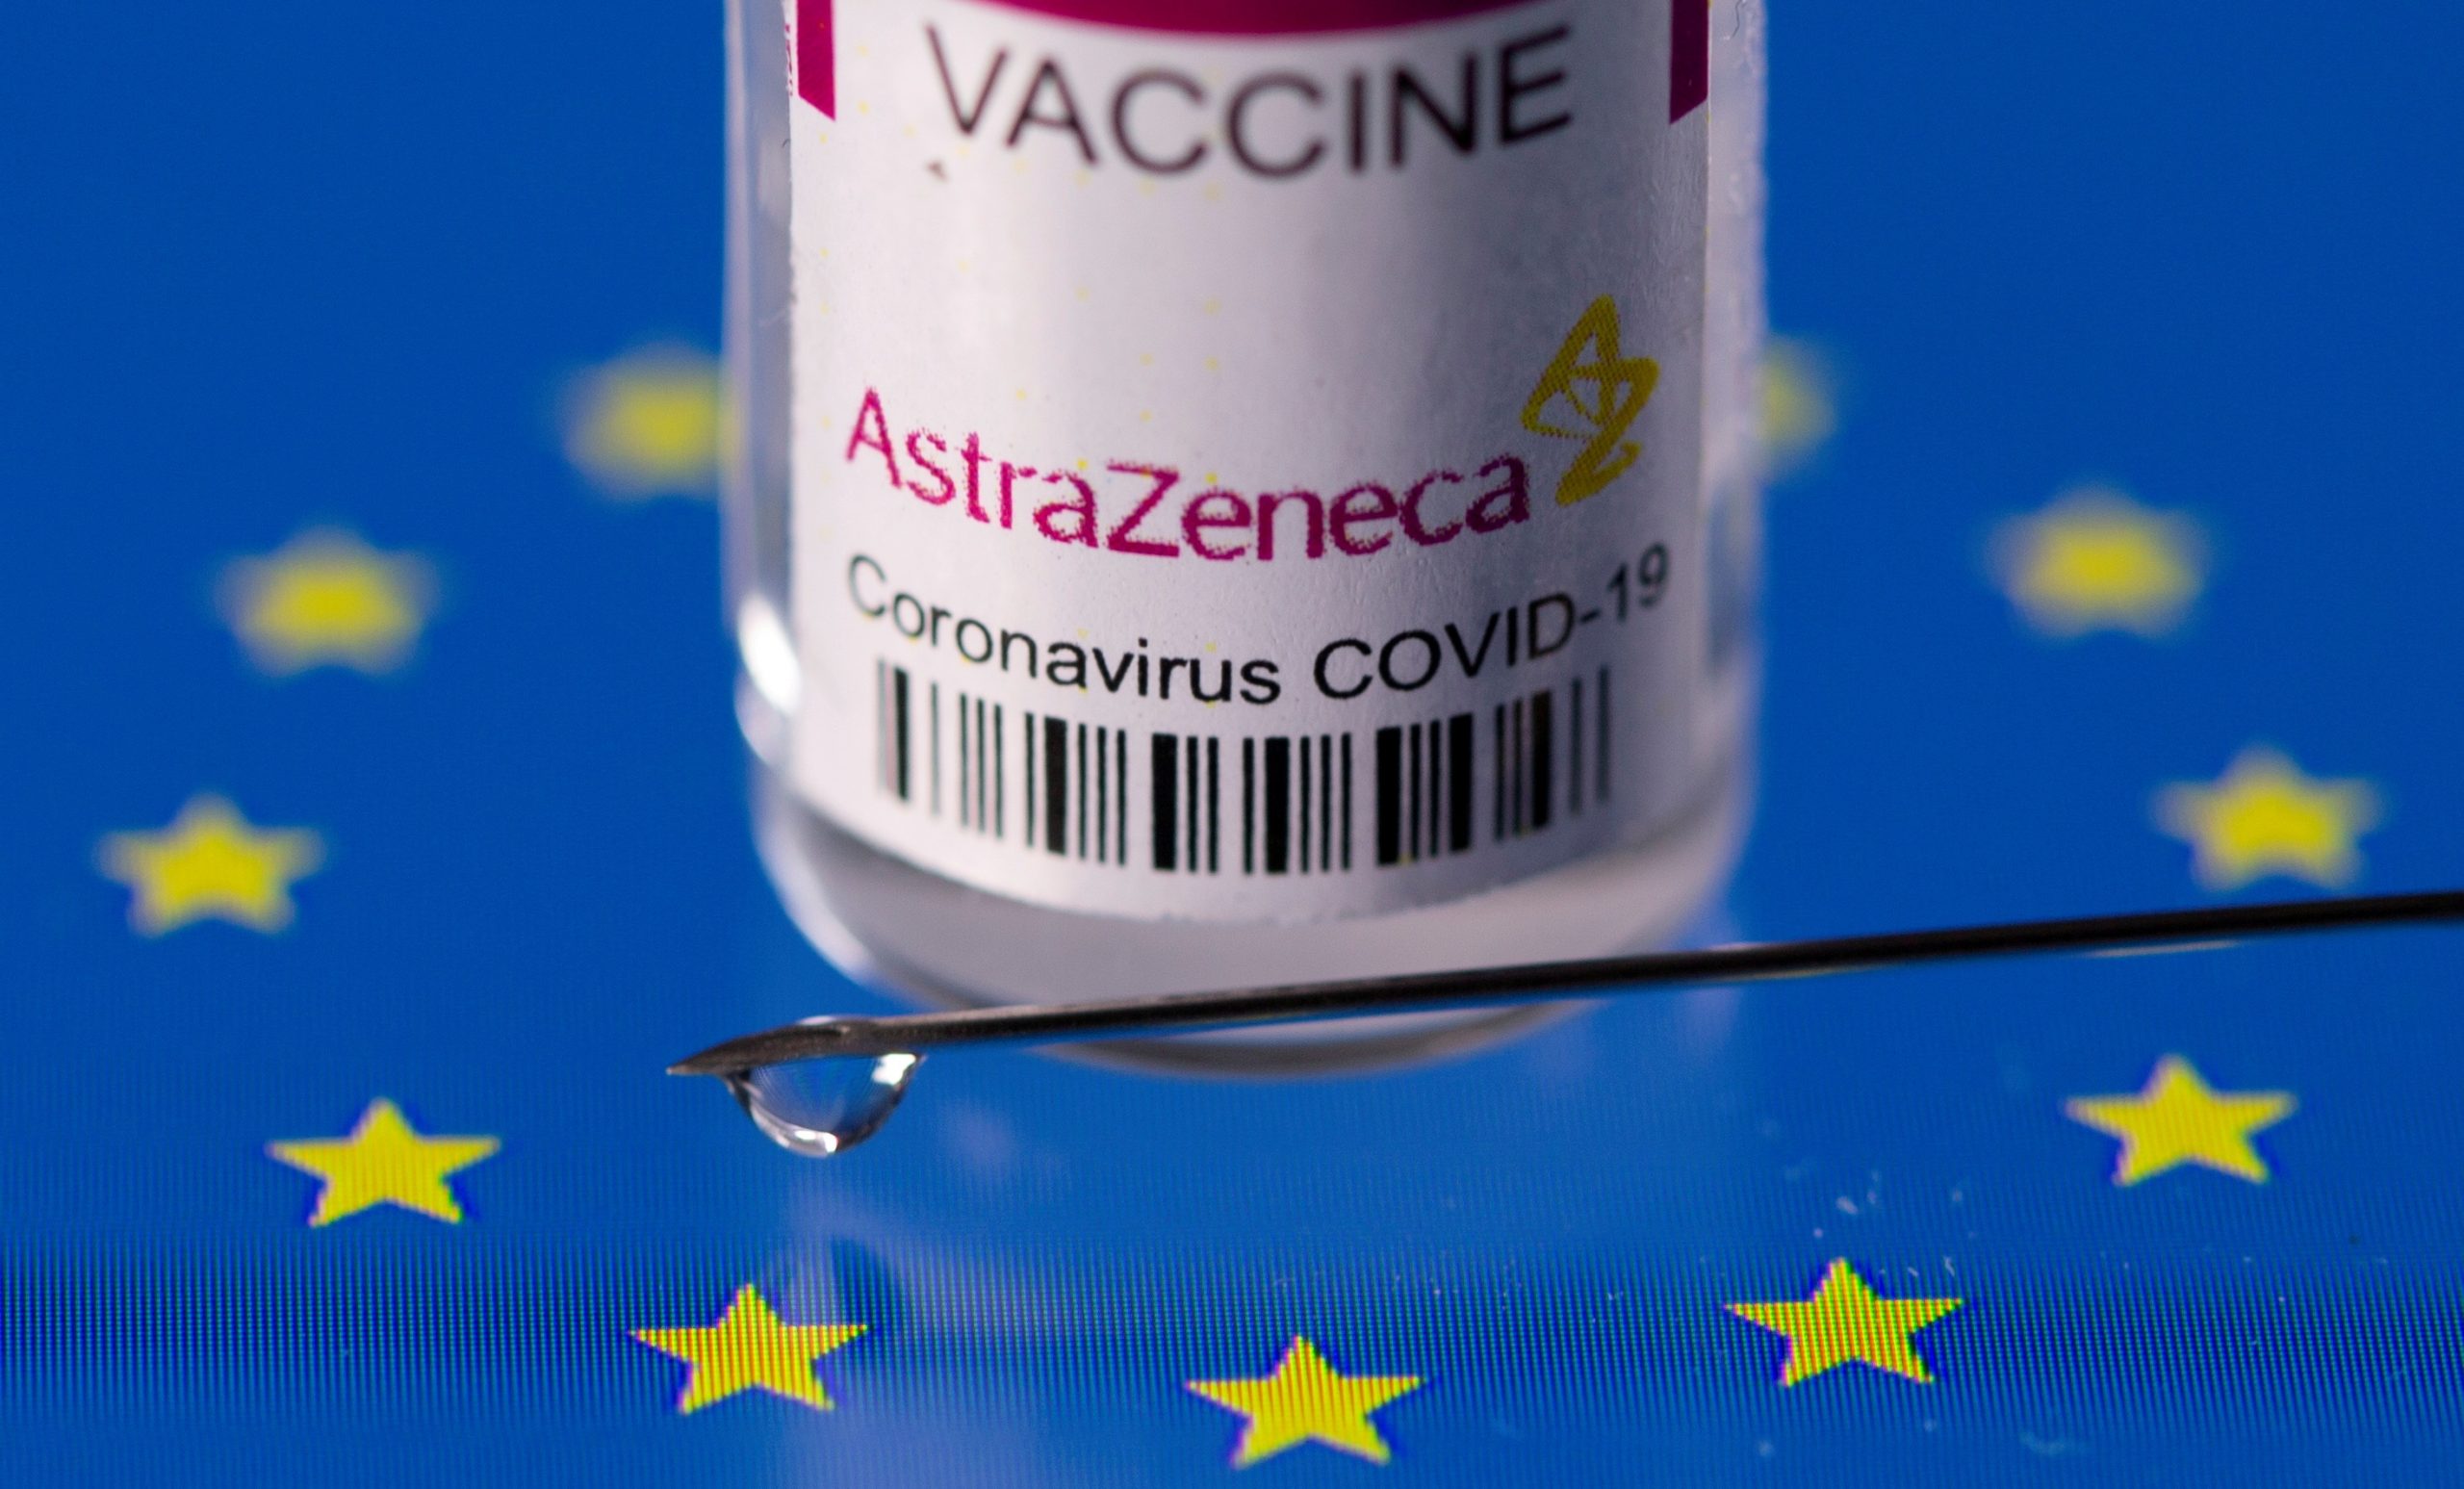 FILE PHOTO: Vial labelled "AstraZeneca coronavirus disease (COVID-19) vaccine" placed on displayed EU flag is seen in this illustration picture FILE PHOTO: Vial labelled "AstraZeneca coronavirus disease (COVID-19) vaccine" placed on displayed EU flag is seen in this illustration picture taken March 24, 2021. REUTERS/Dado Ruvic/File Photo DADO RUVIC